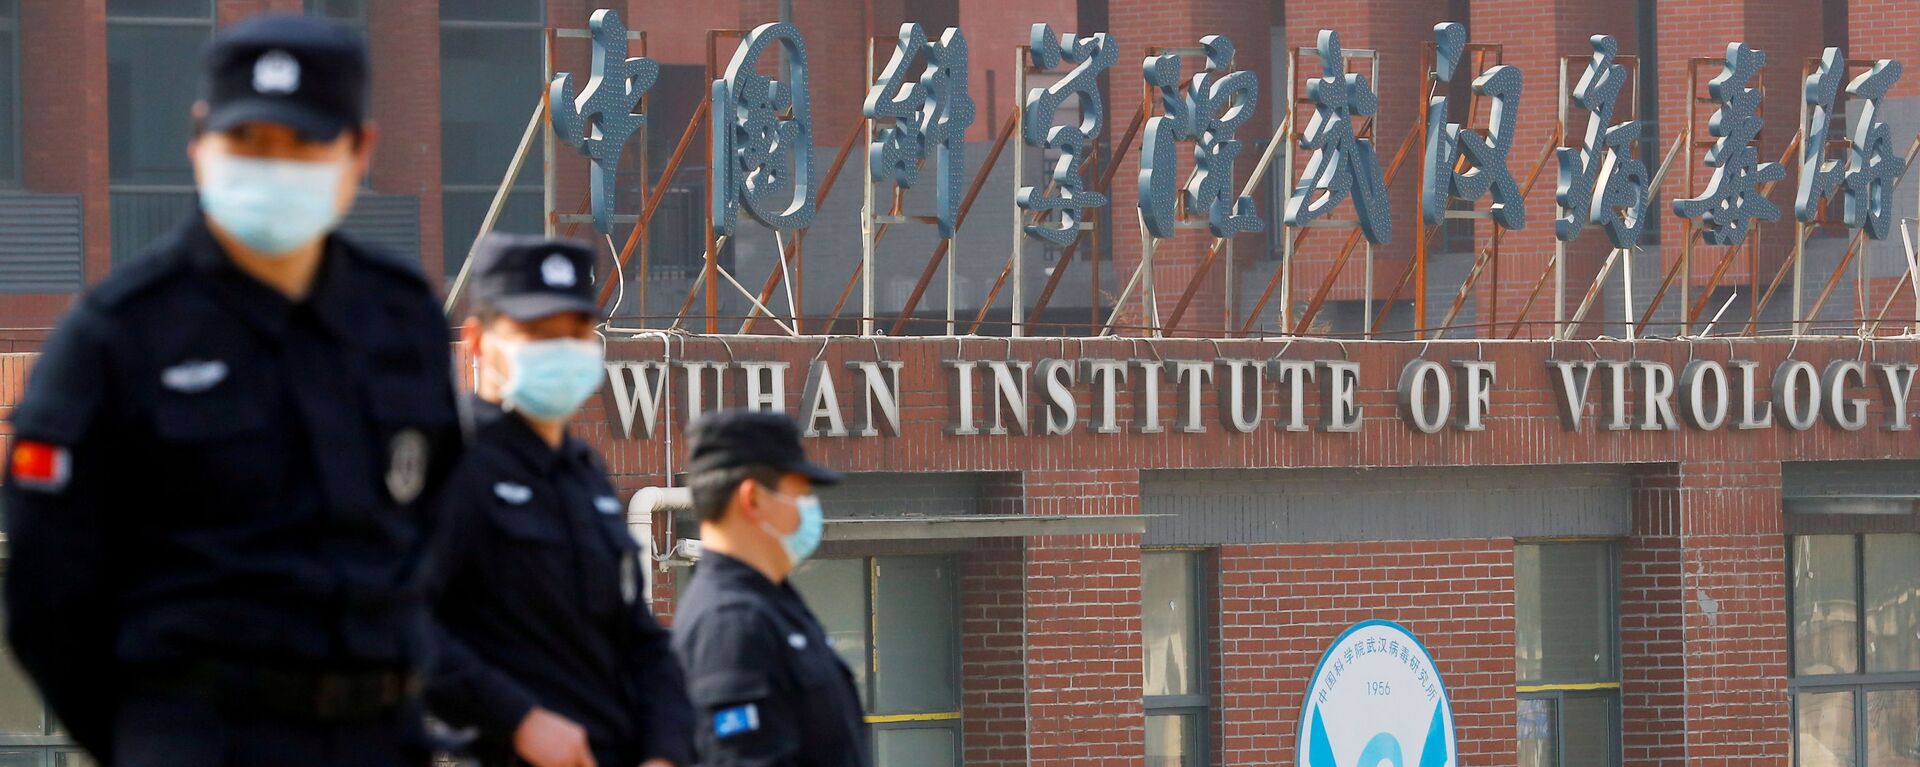 Security personnel keep watch outside the Wuhan Institute of Virology during the visit by the World Health Organization (WHO) team tasked with investigating the origins of the coronavirus disease (COVID-19), in Wuhan, Hubei province, China February 3, 2021.  - Sputnik International, 1920, 24.06.2021